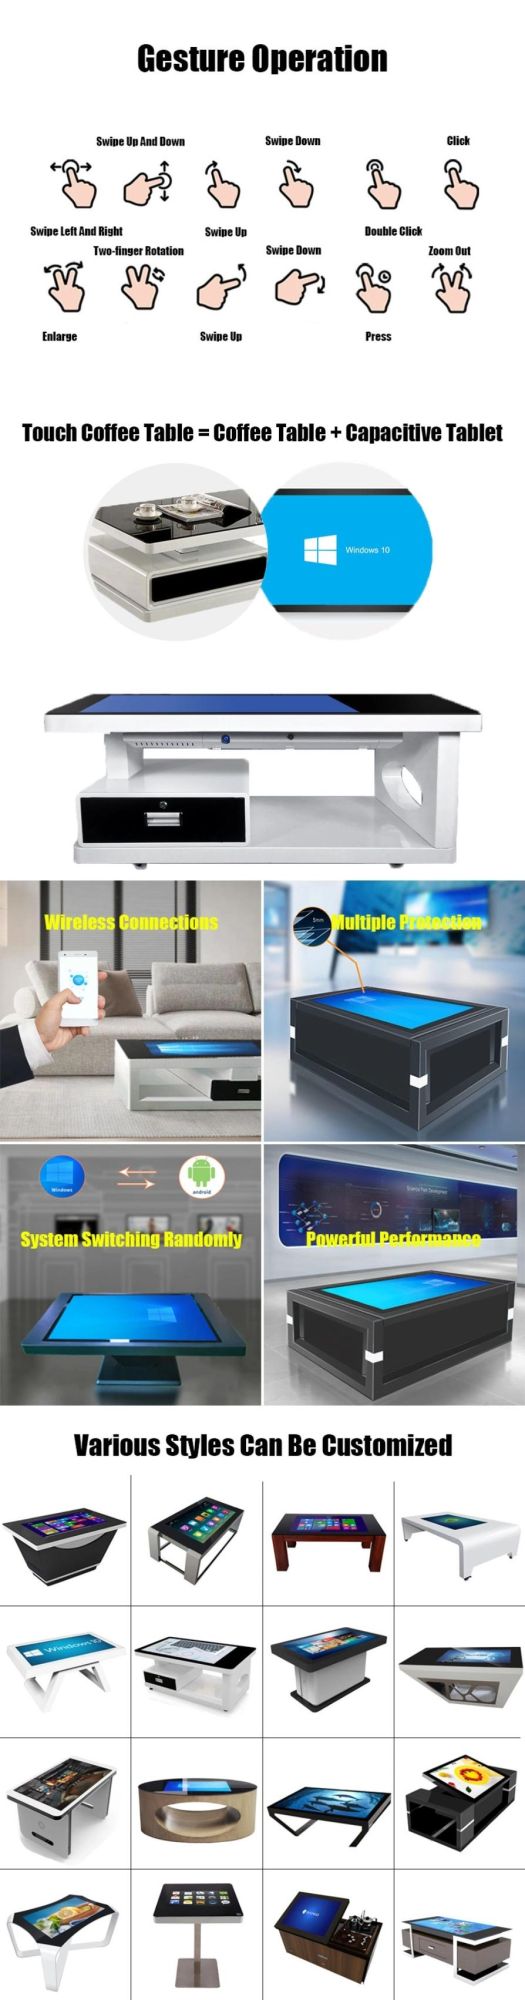 Smart Capacitive Touch Coffee Table Negotiation and Inter-Action All-in-One Machine